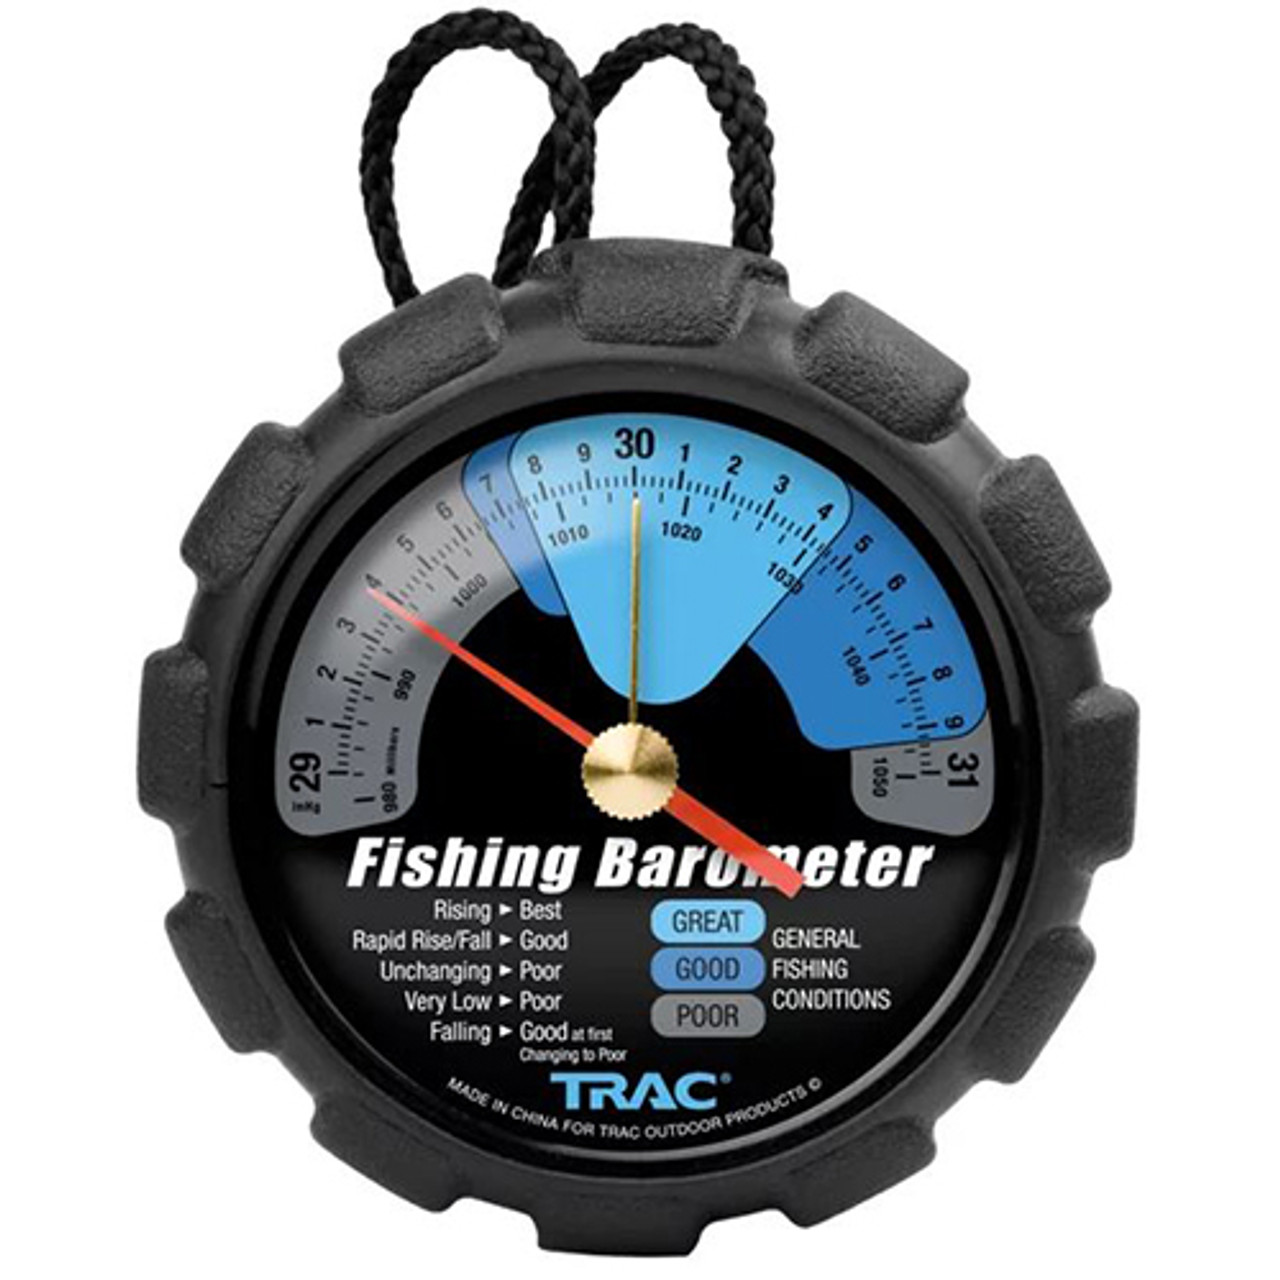 Fishing Barometer Watch, Fishing Point Data Record Fishing Barometric  Thermometer Multifunctional Time Display Weather Forecast for Mountaineering